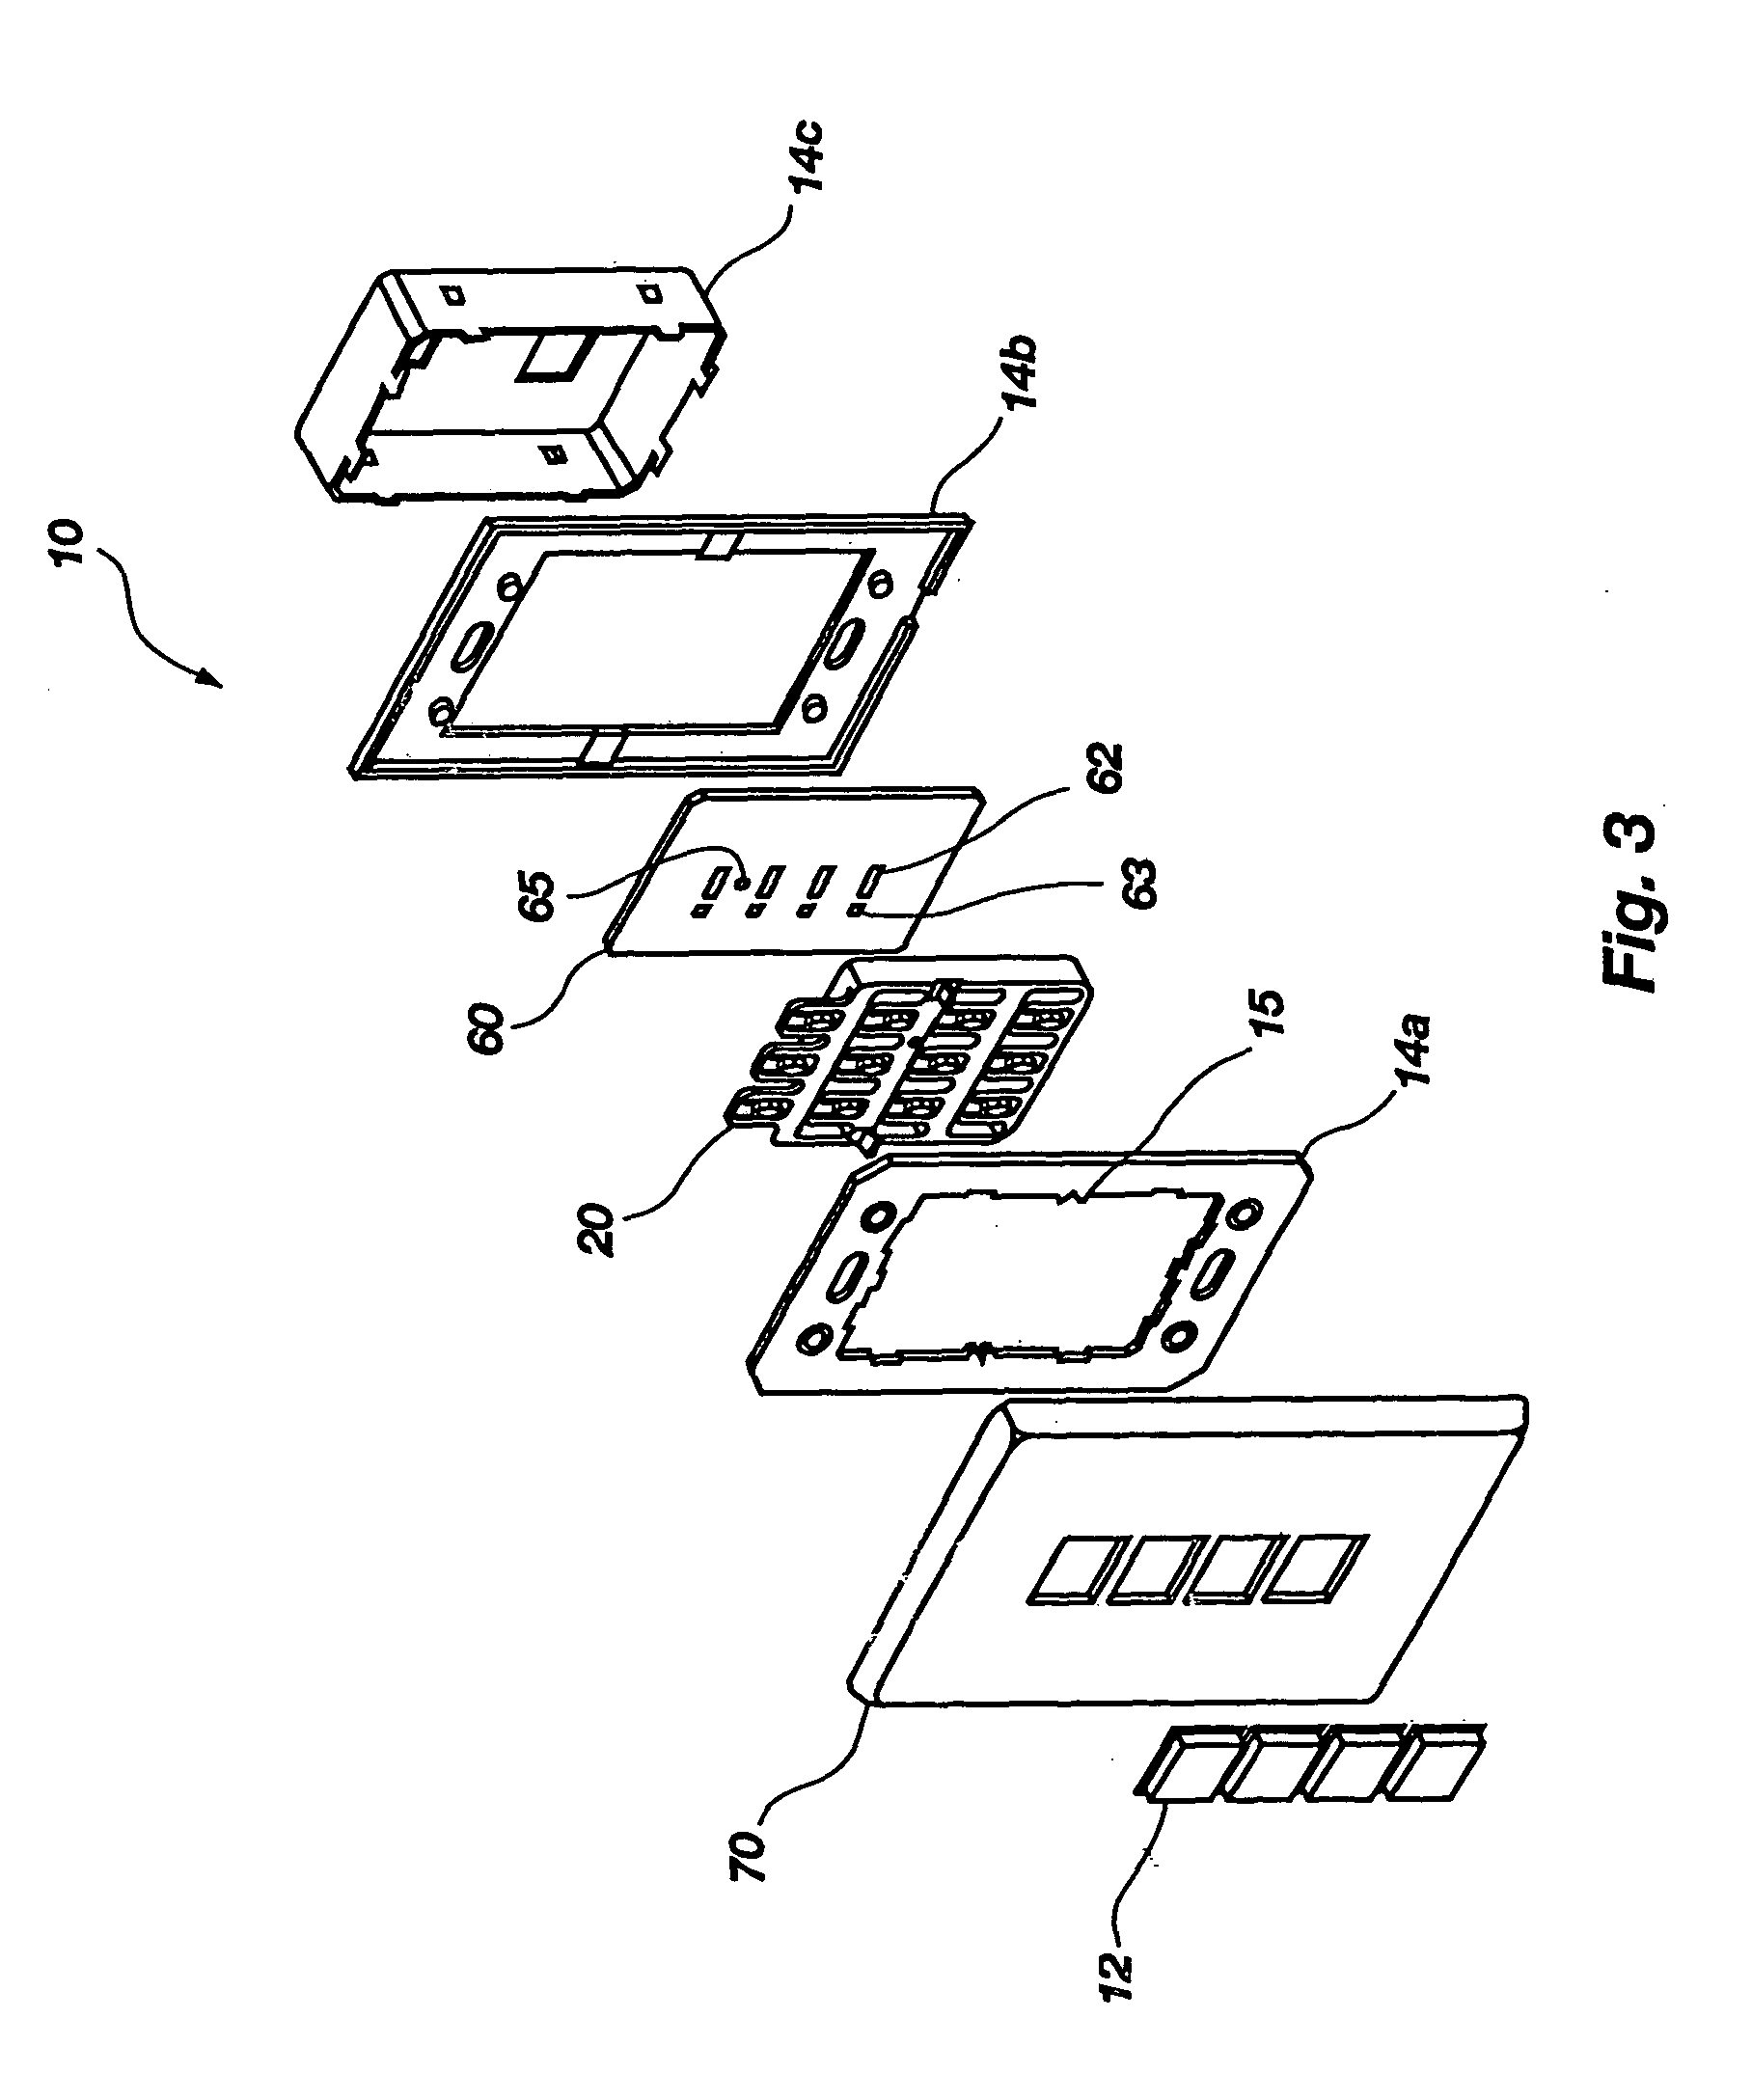 Button assembly with status indicator and programmable backlighting